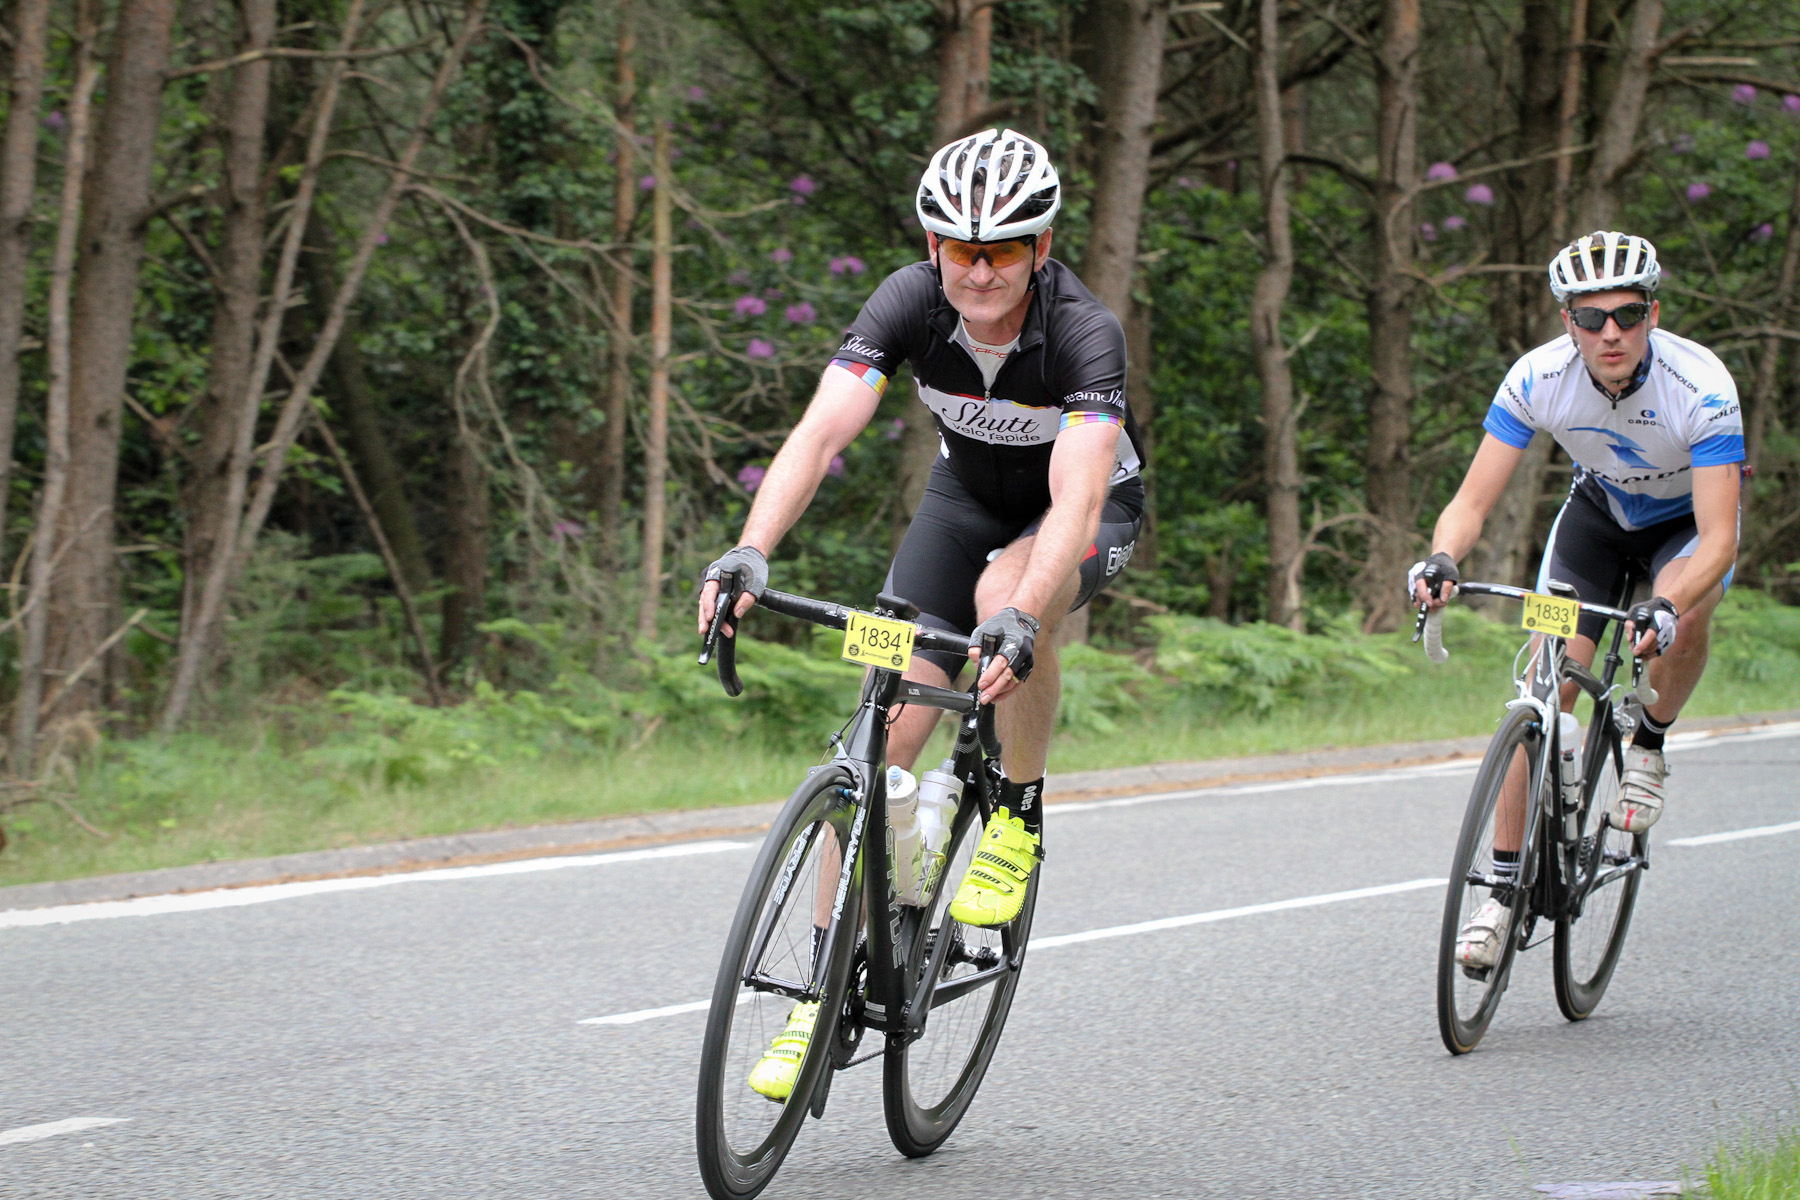 In action at the Wiggle UKCE Bournemouth Sportive riding the 58 Aero on my NeilPryde